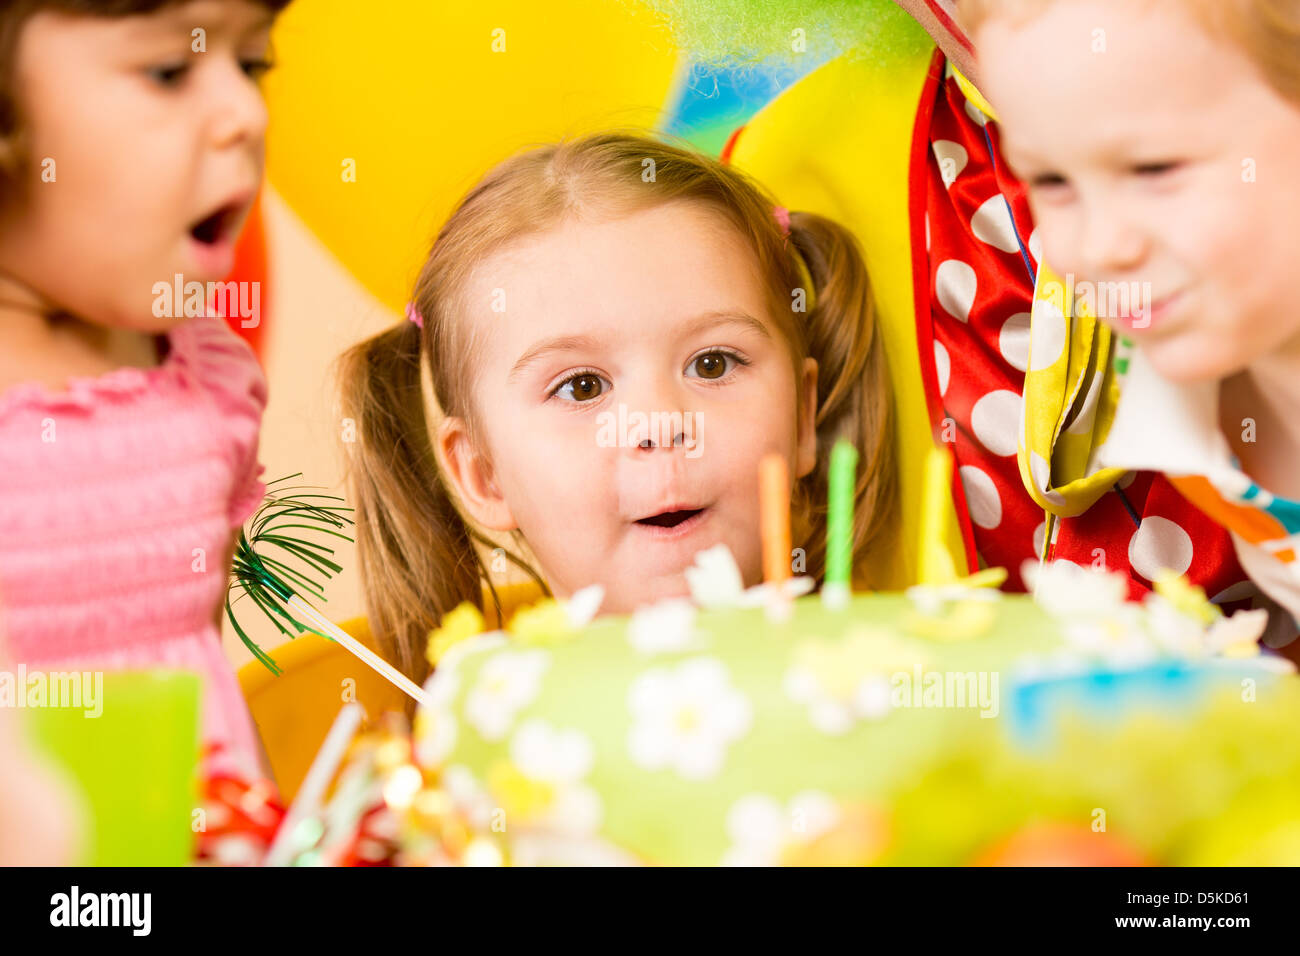 funny kids celebrating birthday party and blowing candles on cake Stock Photo